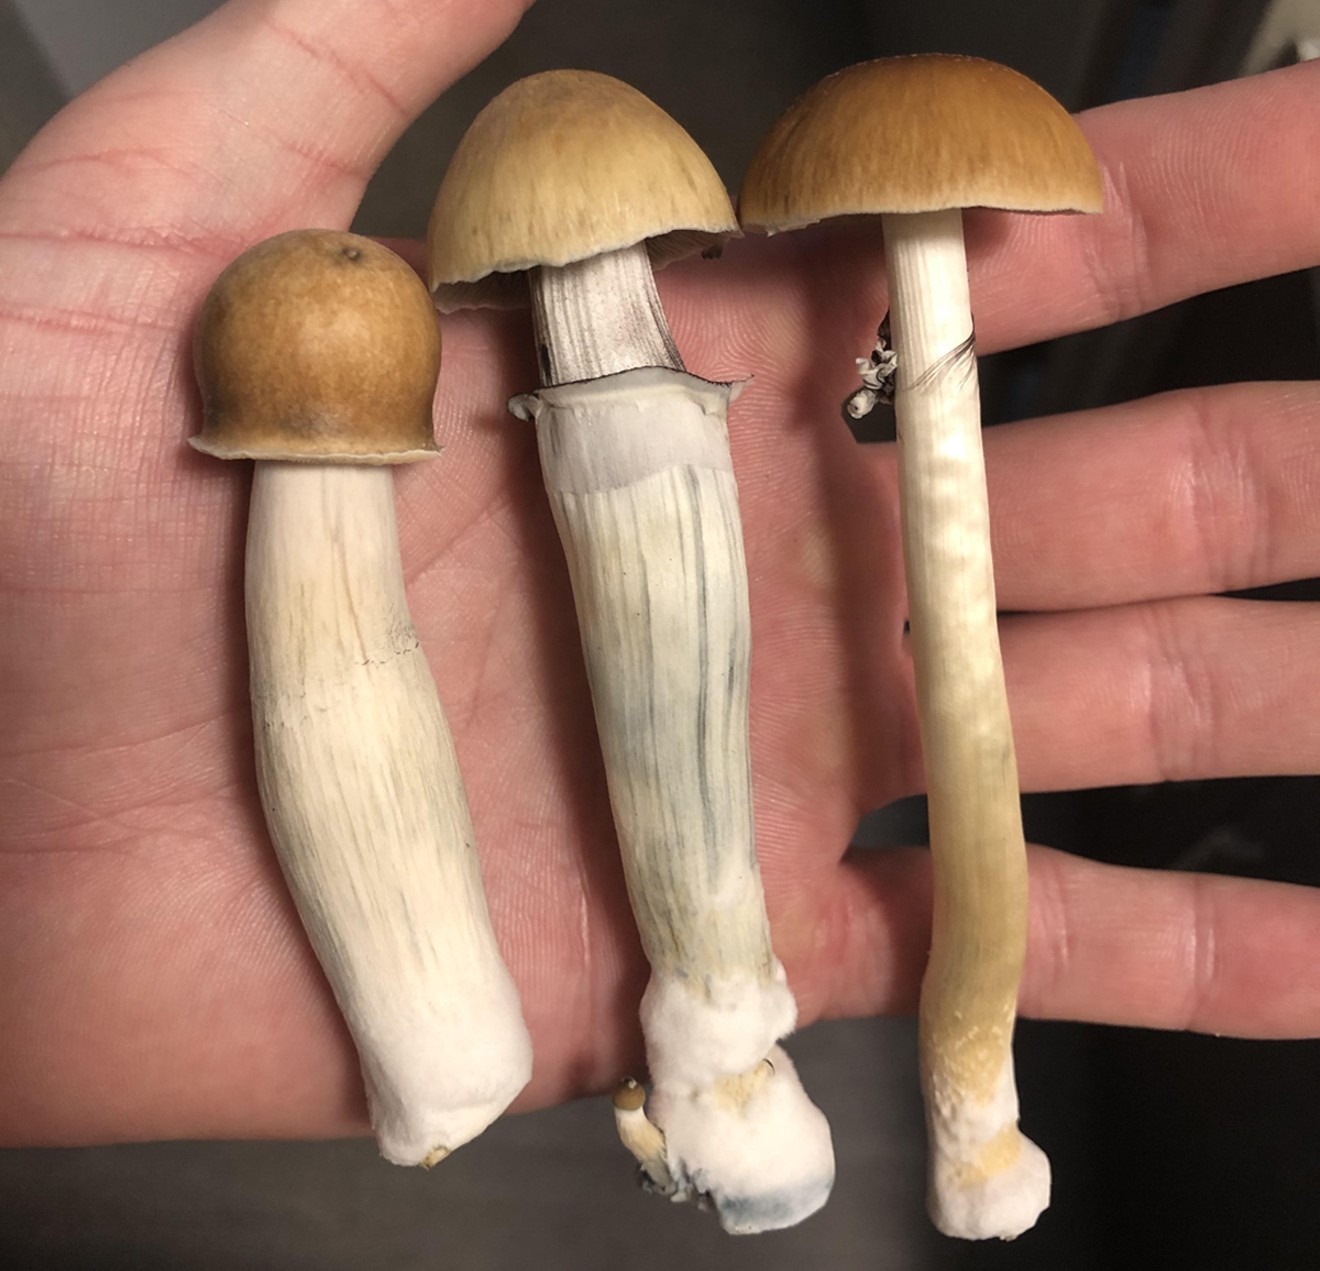 Denver might have just decriminalized psychedelic mushrooms, but dealers have been pushing them for years.